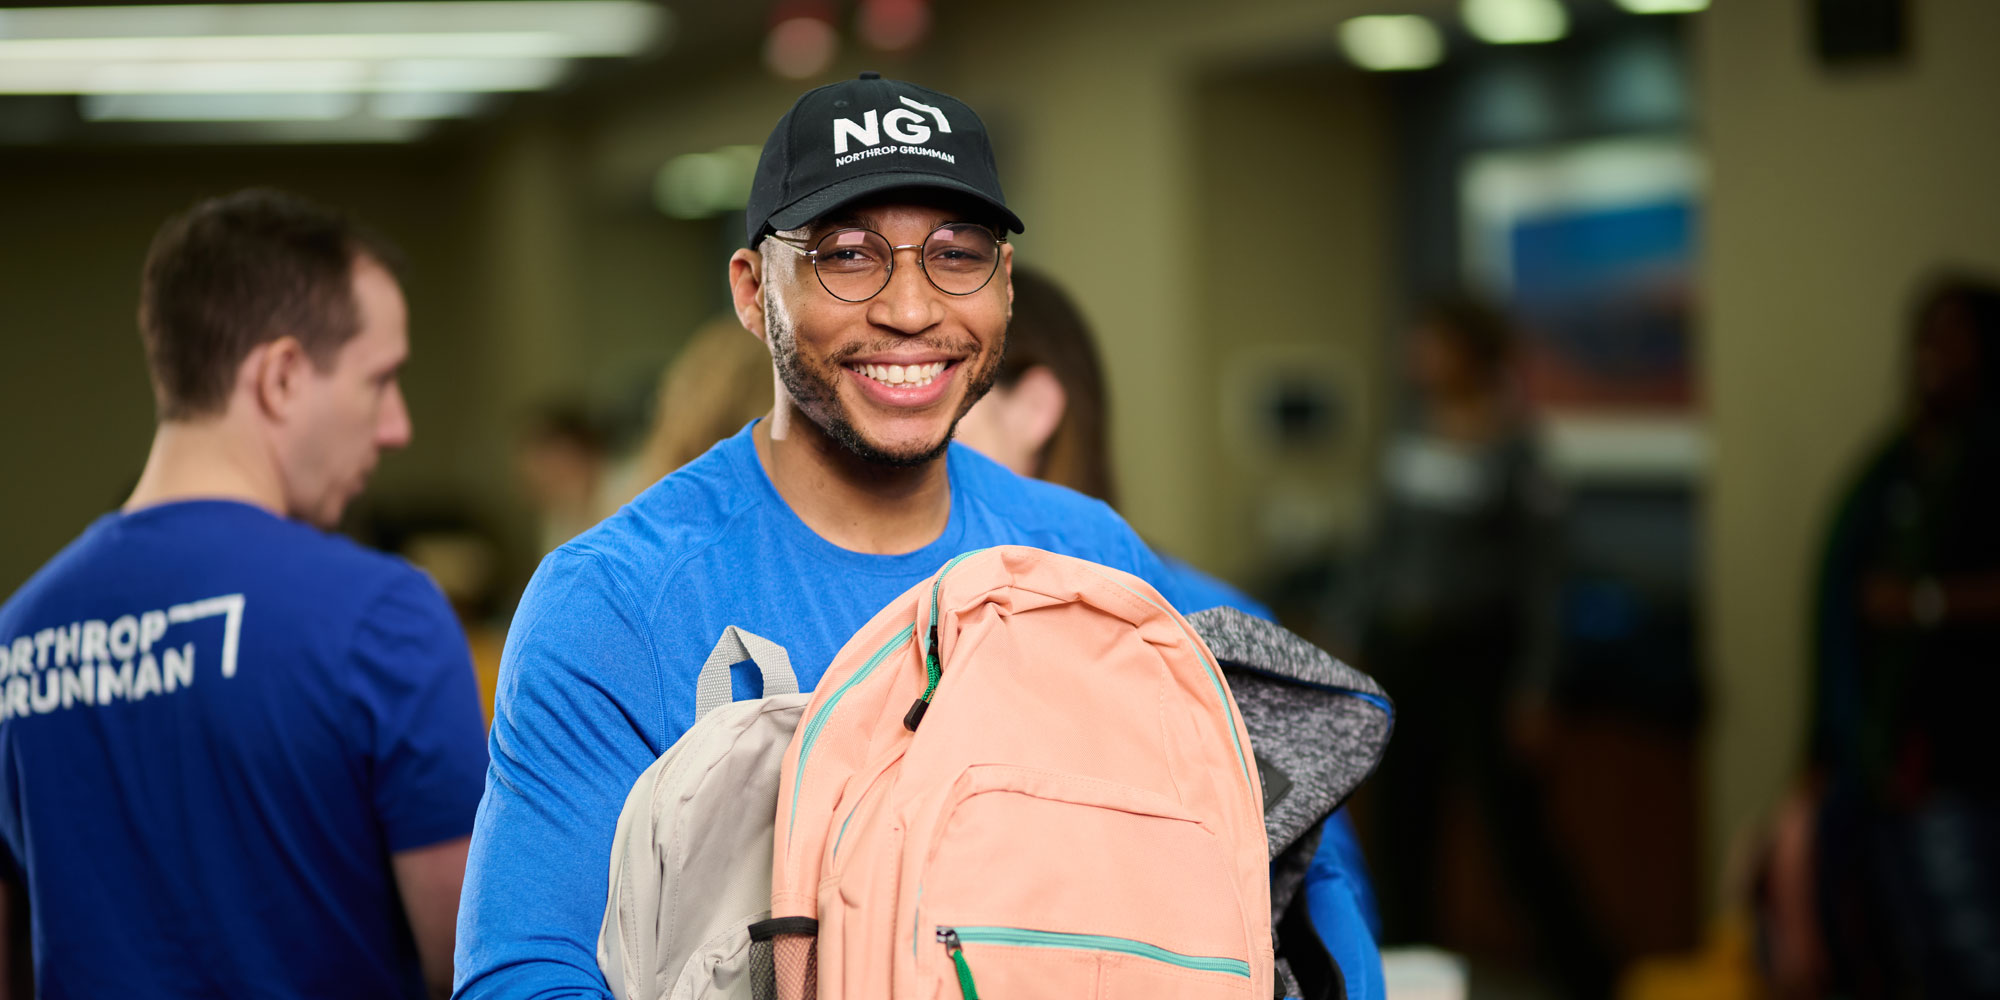 Northrop Grumman employee in branded shirt stands holding a backpack during an event.